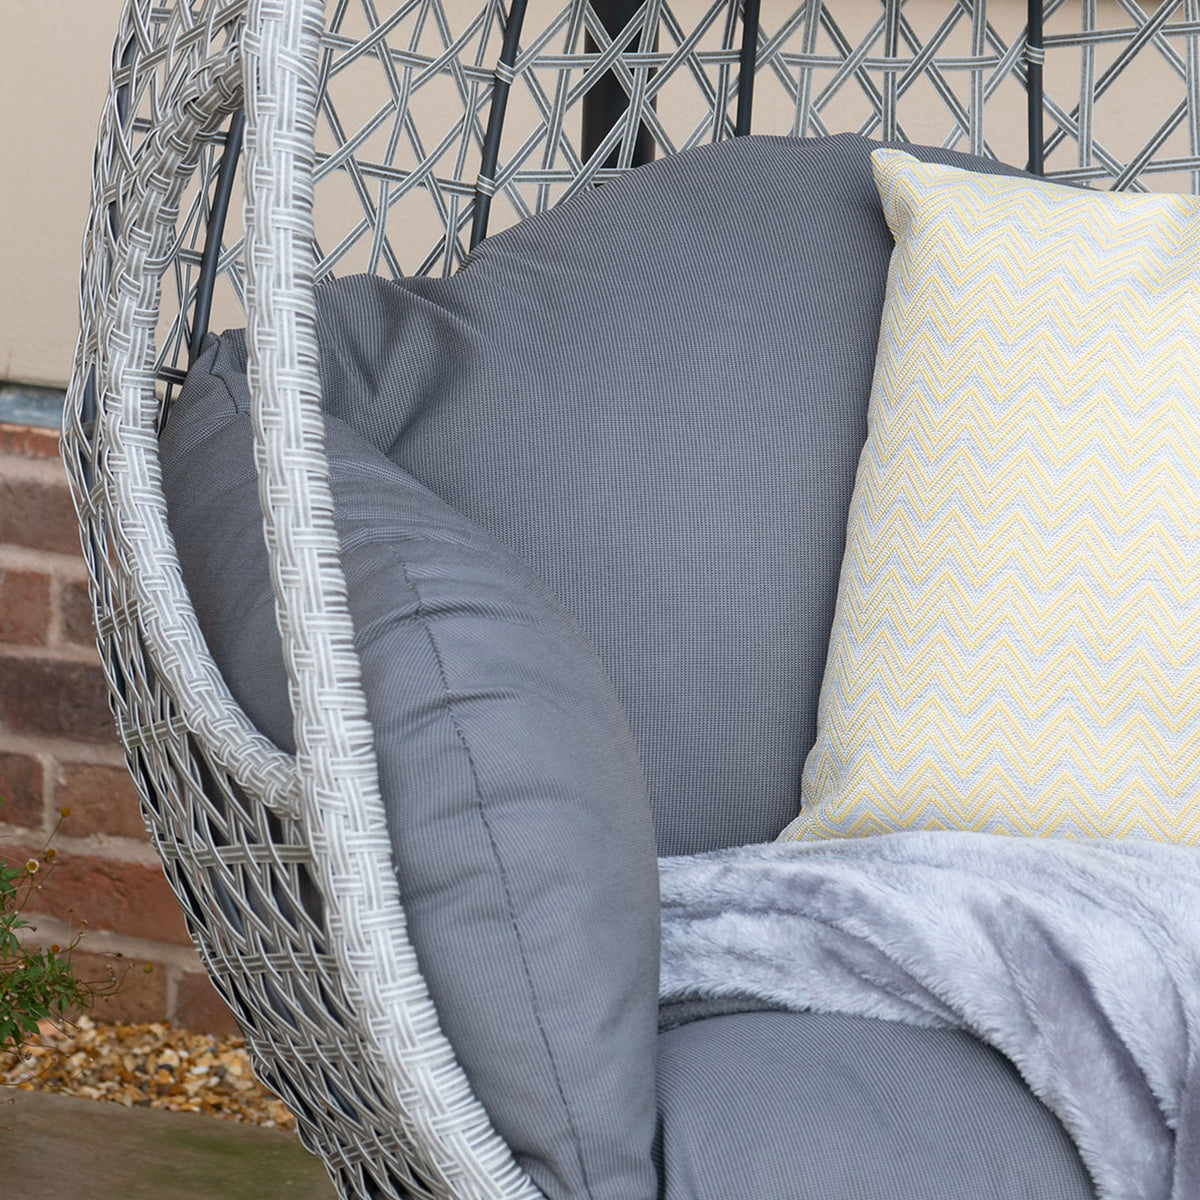 Maze Ascot Grey Outdoor Hanging Egg Chair from Roseland Furniture